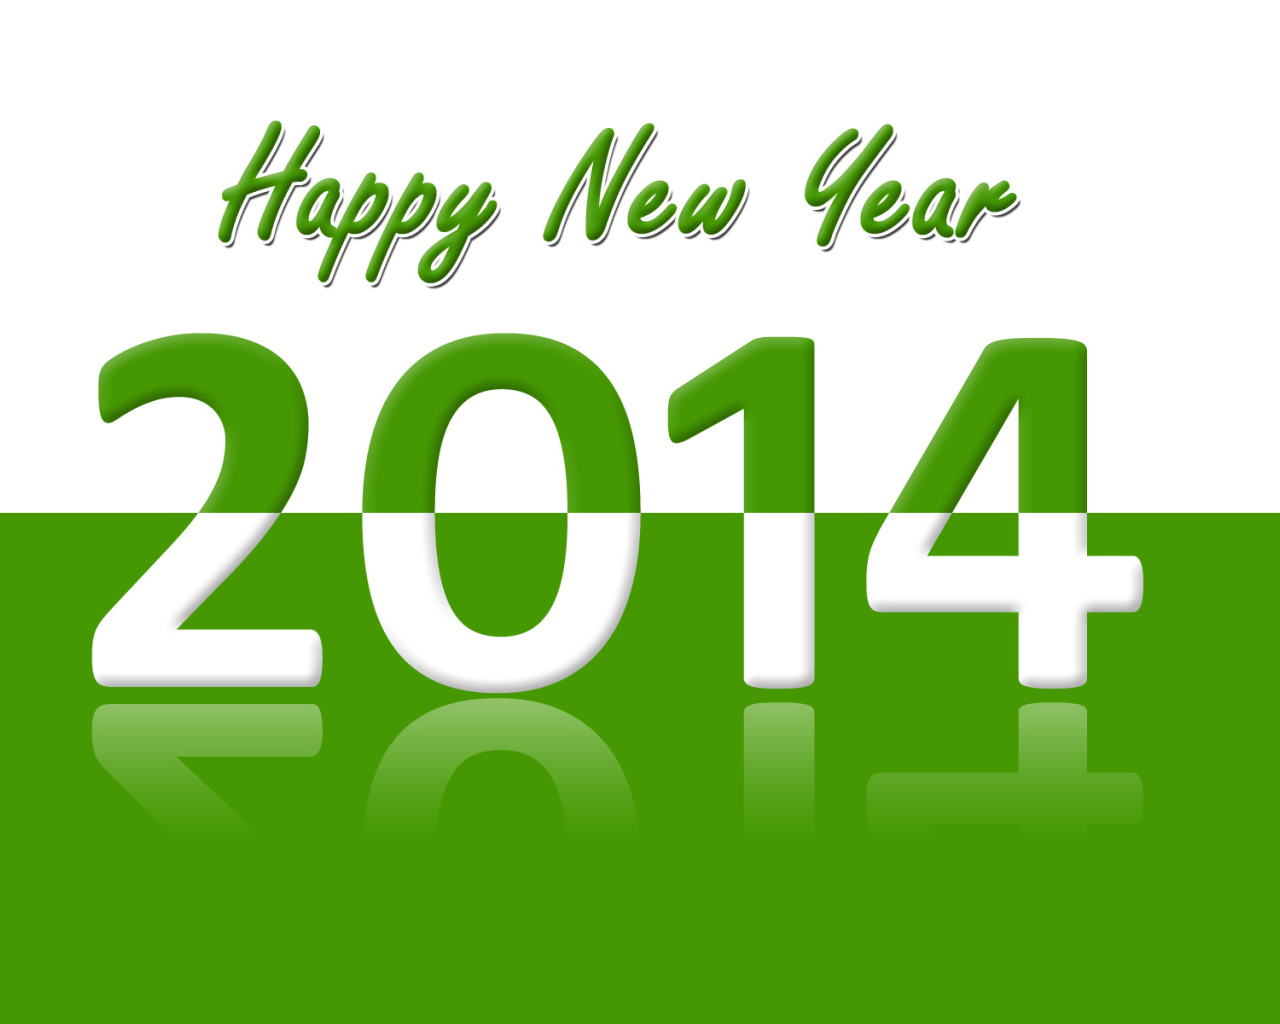 Happy New Year 2014, green and white color